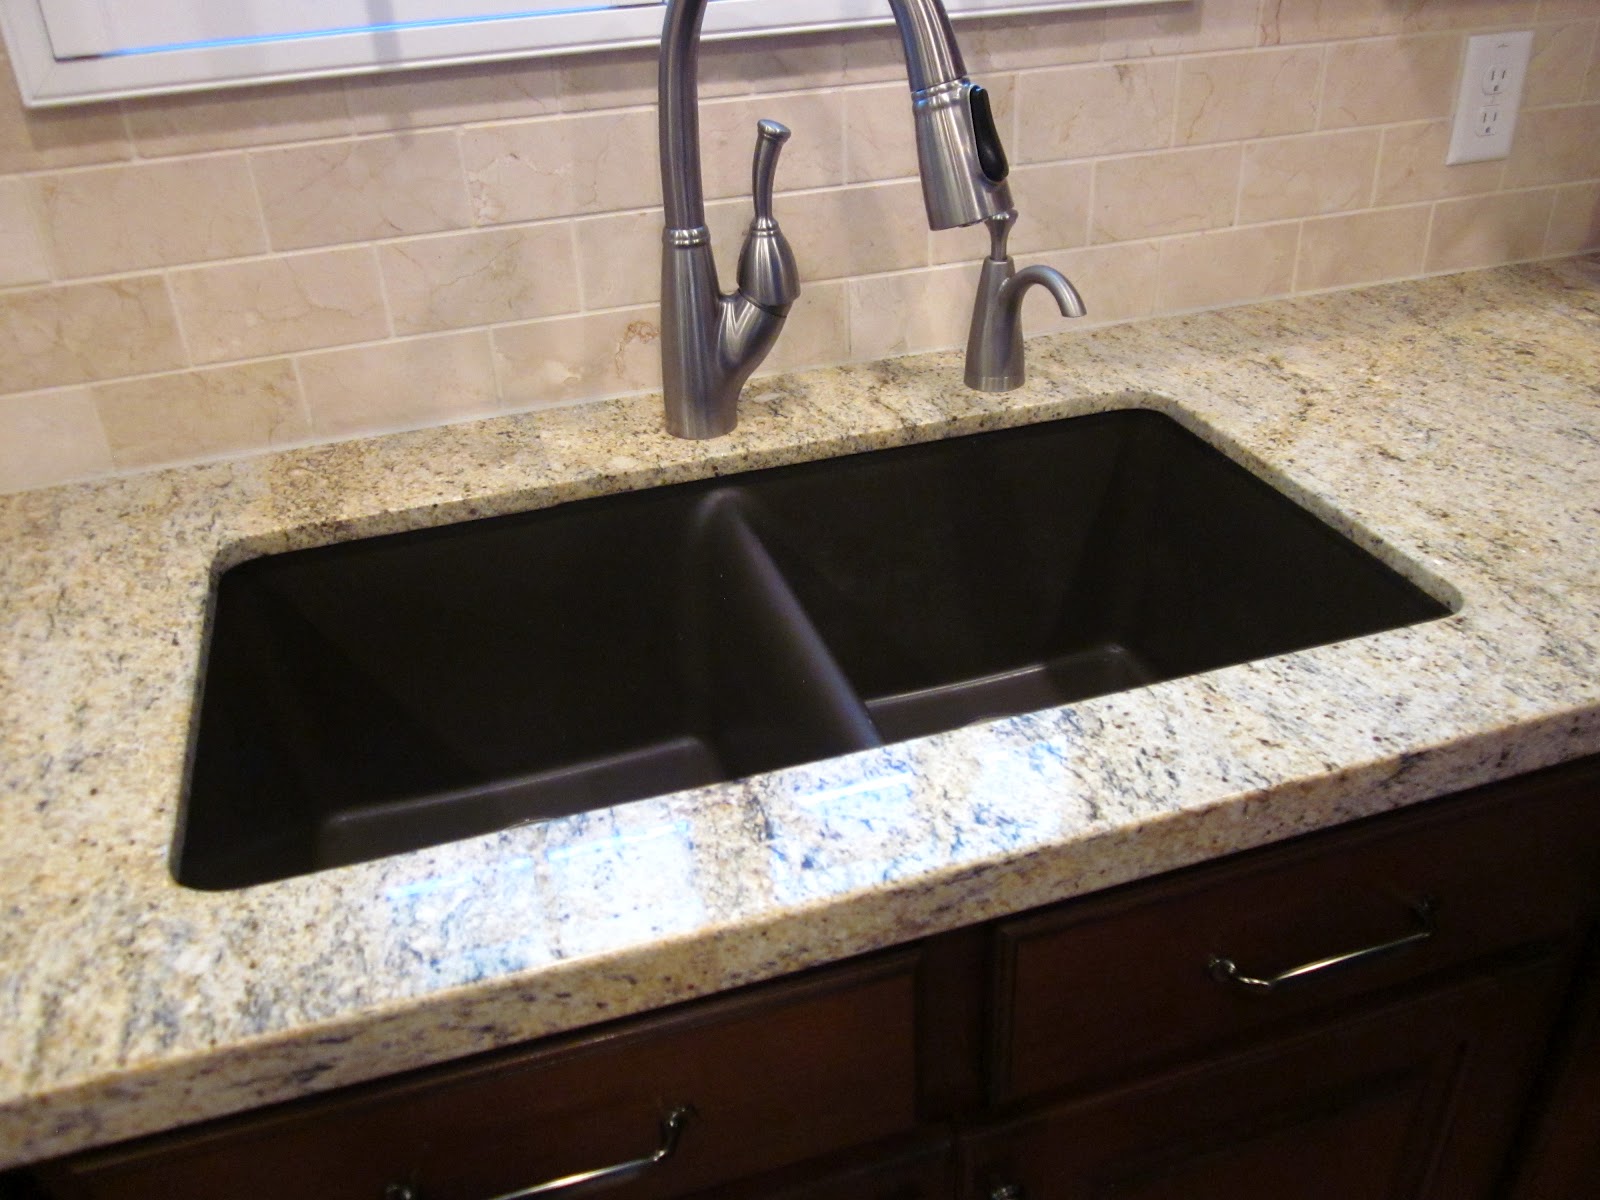 How to Get the White Haze Off of Your Granite Sink Home Guides